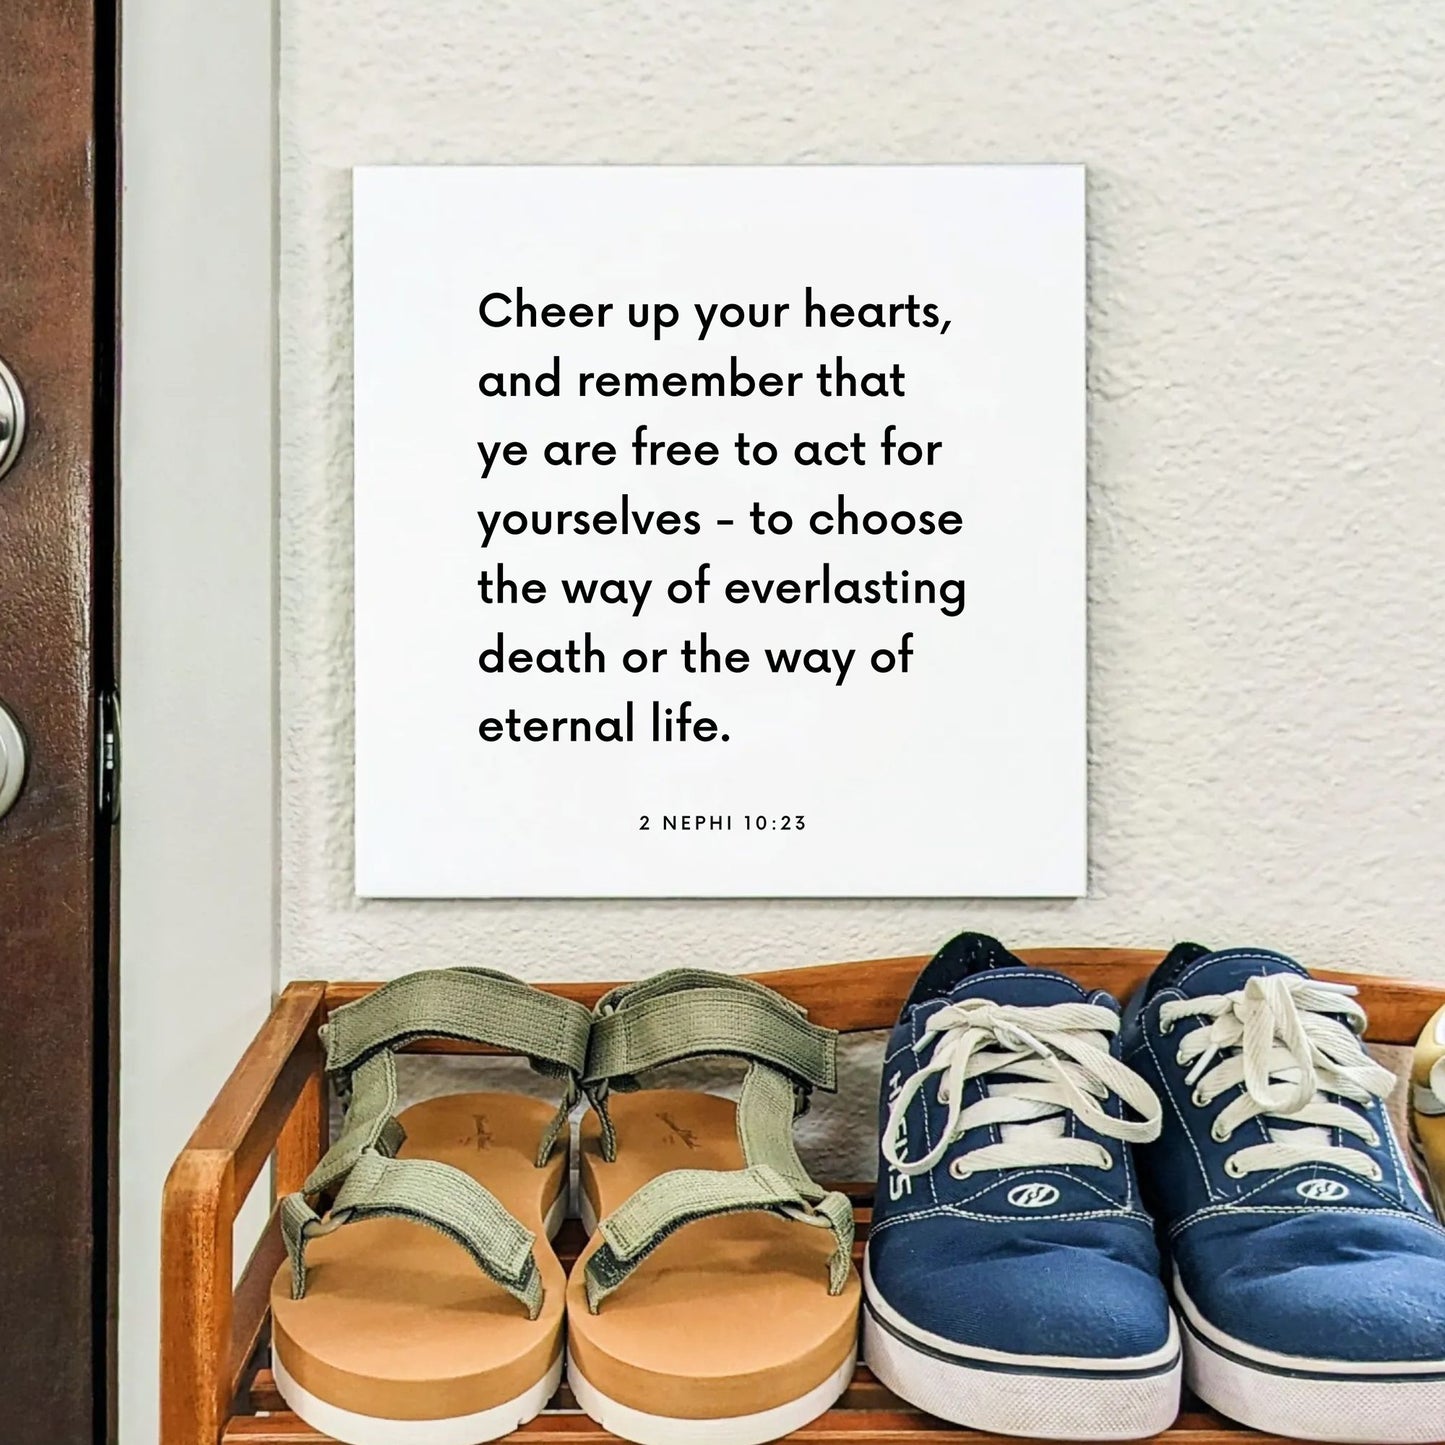 Shoes mouting of the scripture tile for 2 Nephi 10:23 - "Cheer up your hearts, and remember that ye are free"